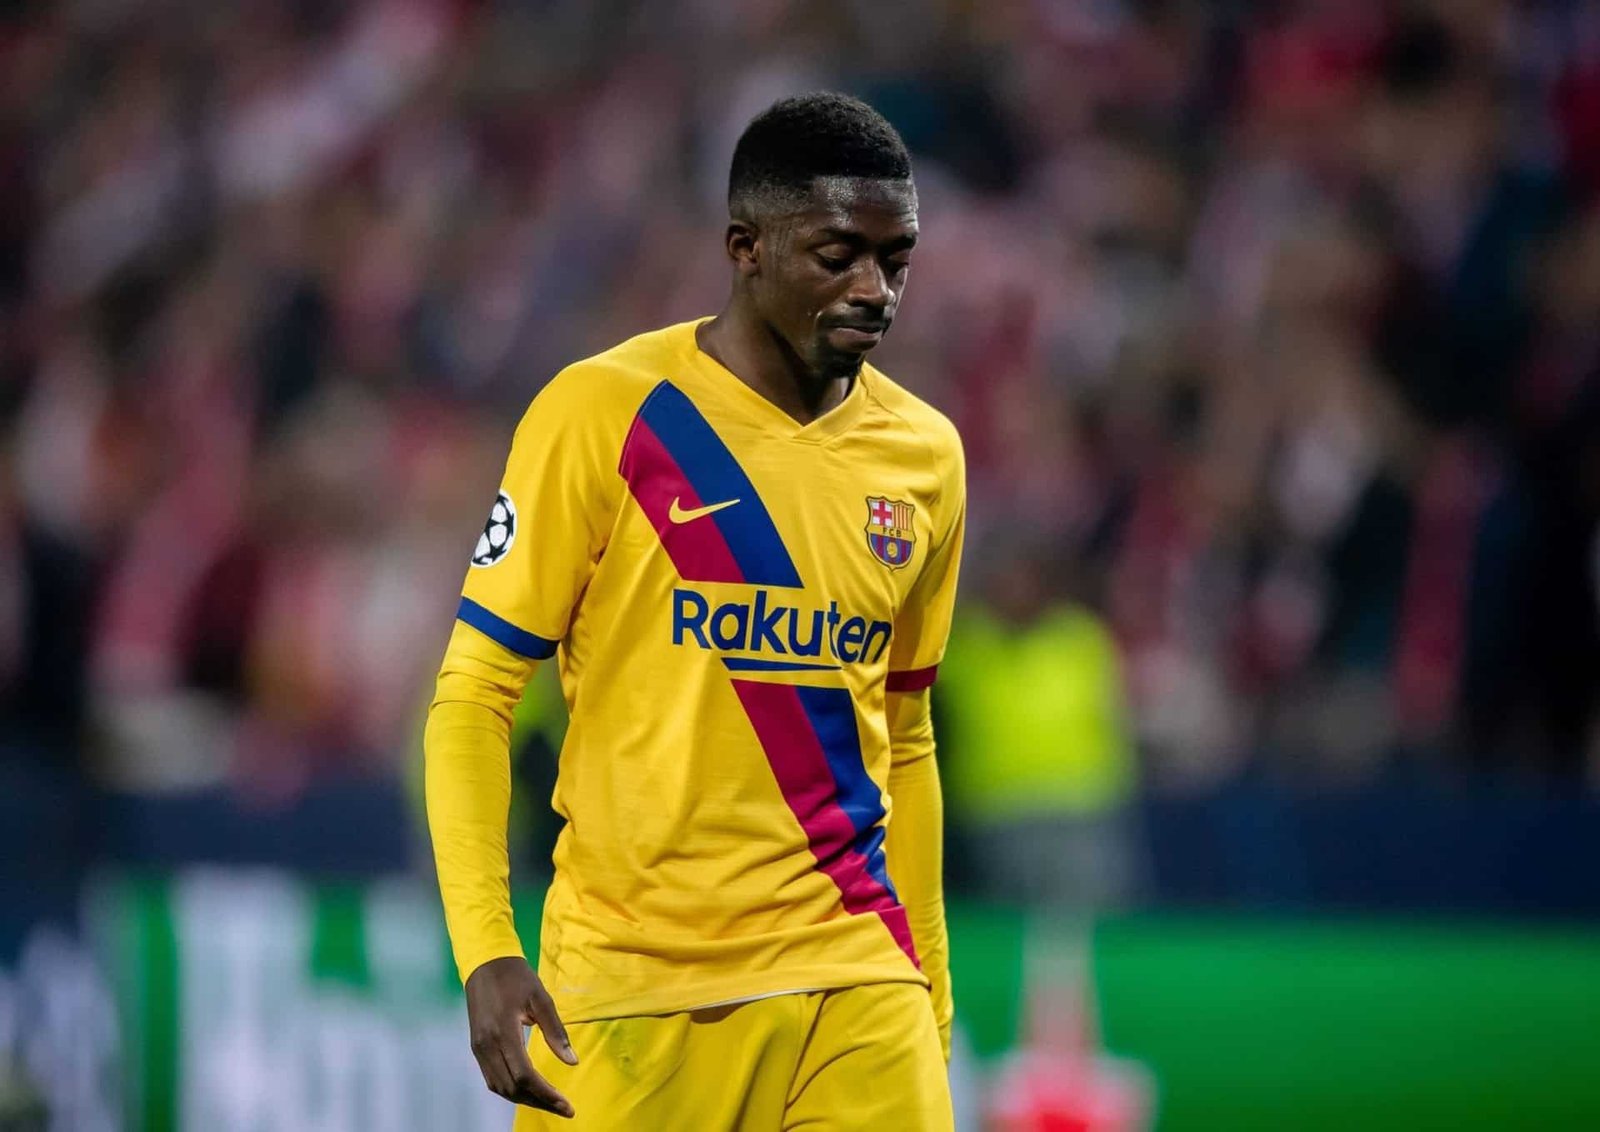 Ousmane Dembele is reportedly going to leave Barca on a free deal